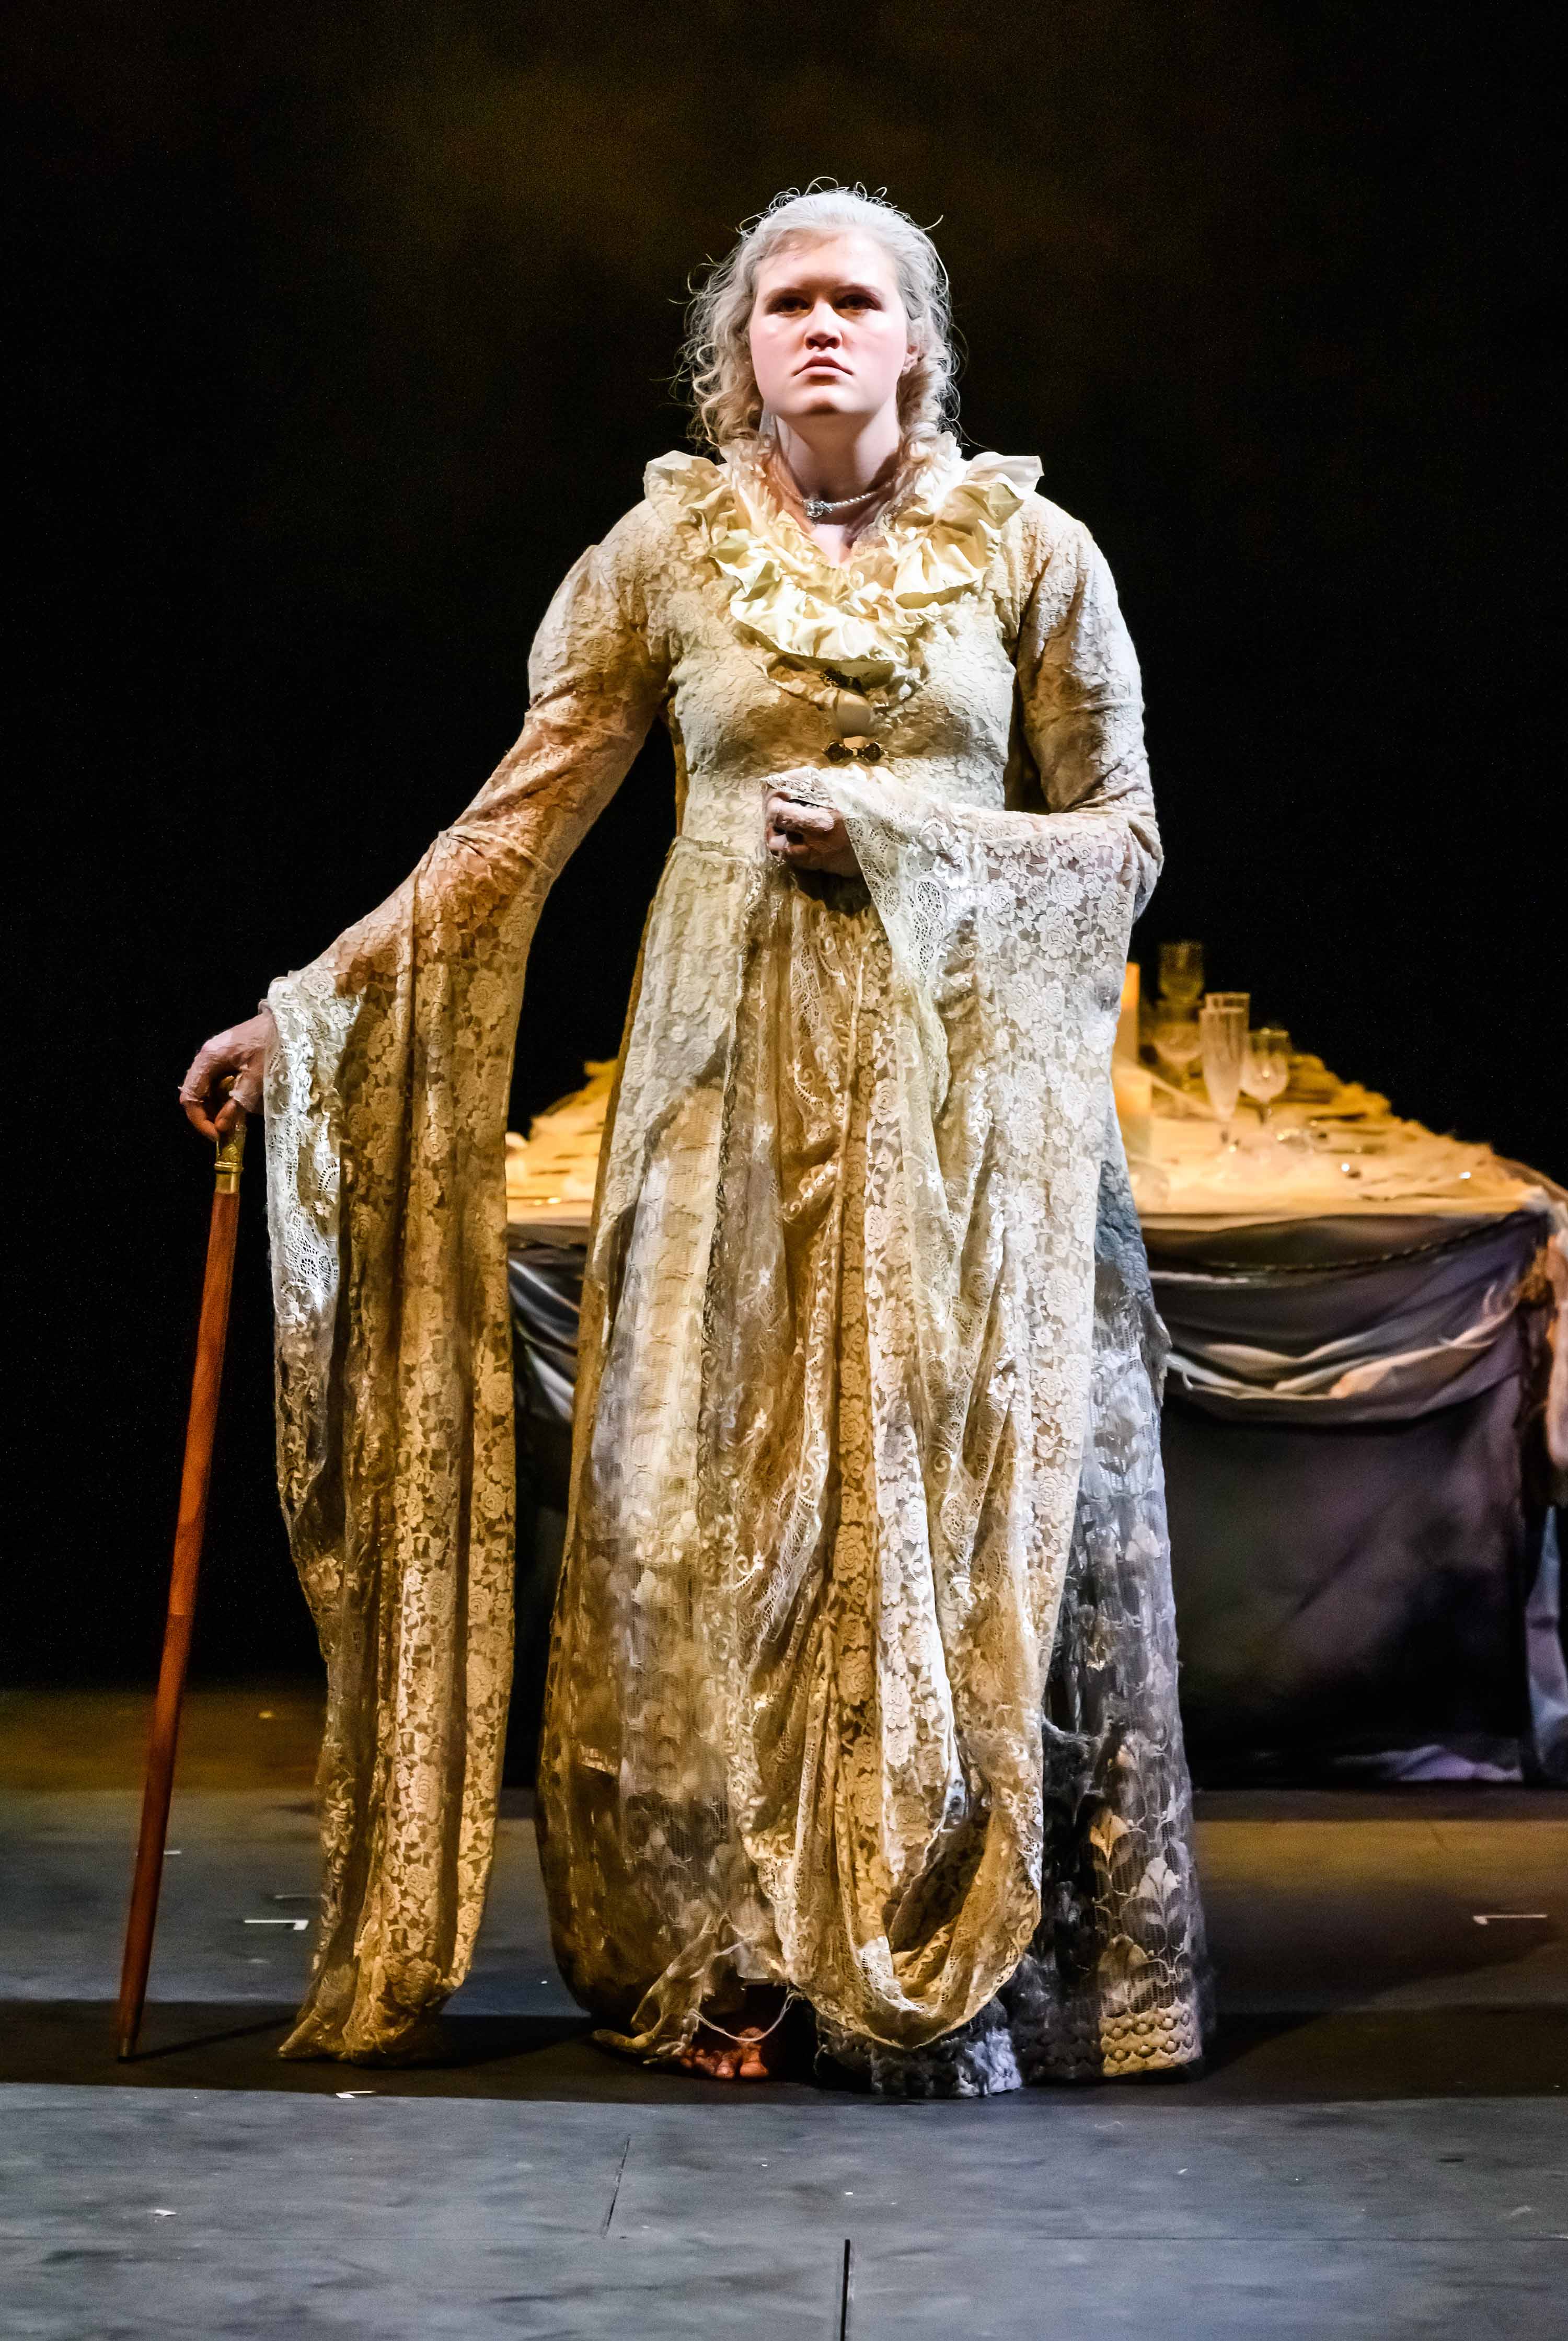 The Senior Production of Great Expectations in Cobham Theatre, 4-7 December 2019